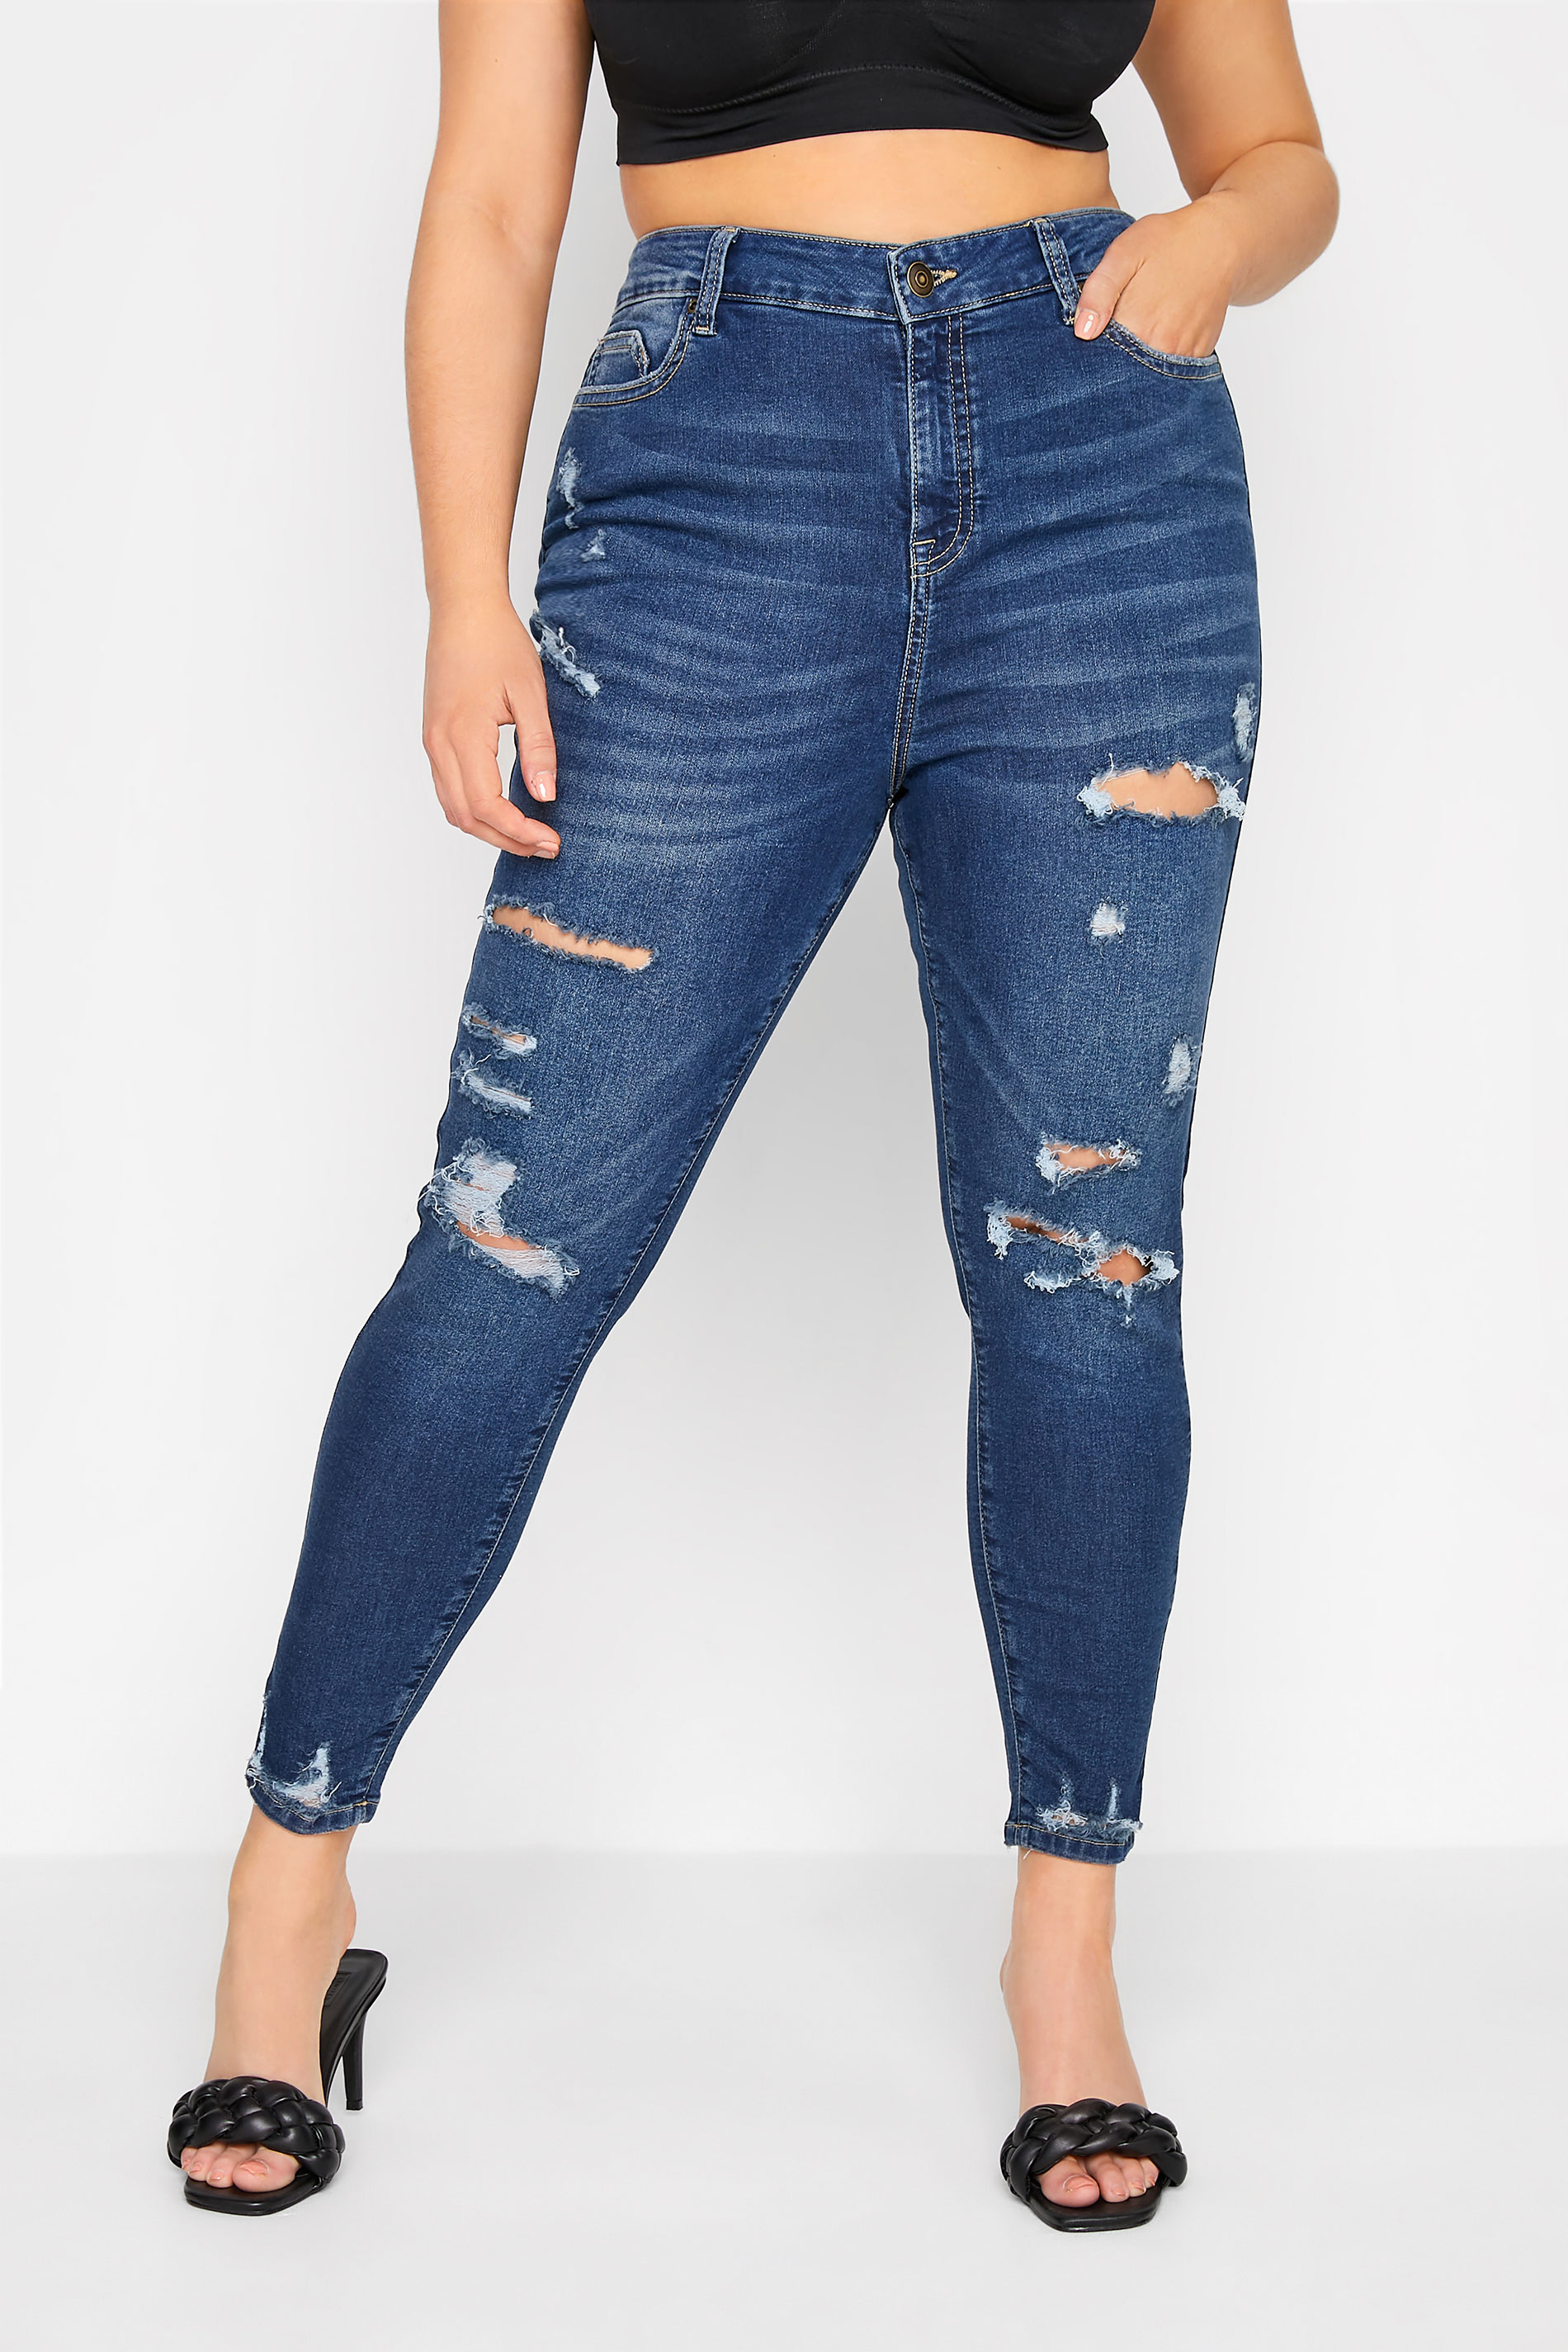 YOURS FOR GOOD Curve Indigo Blue Ripped AVA Jeans_A.jpg